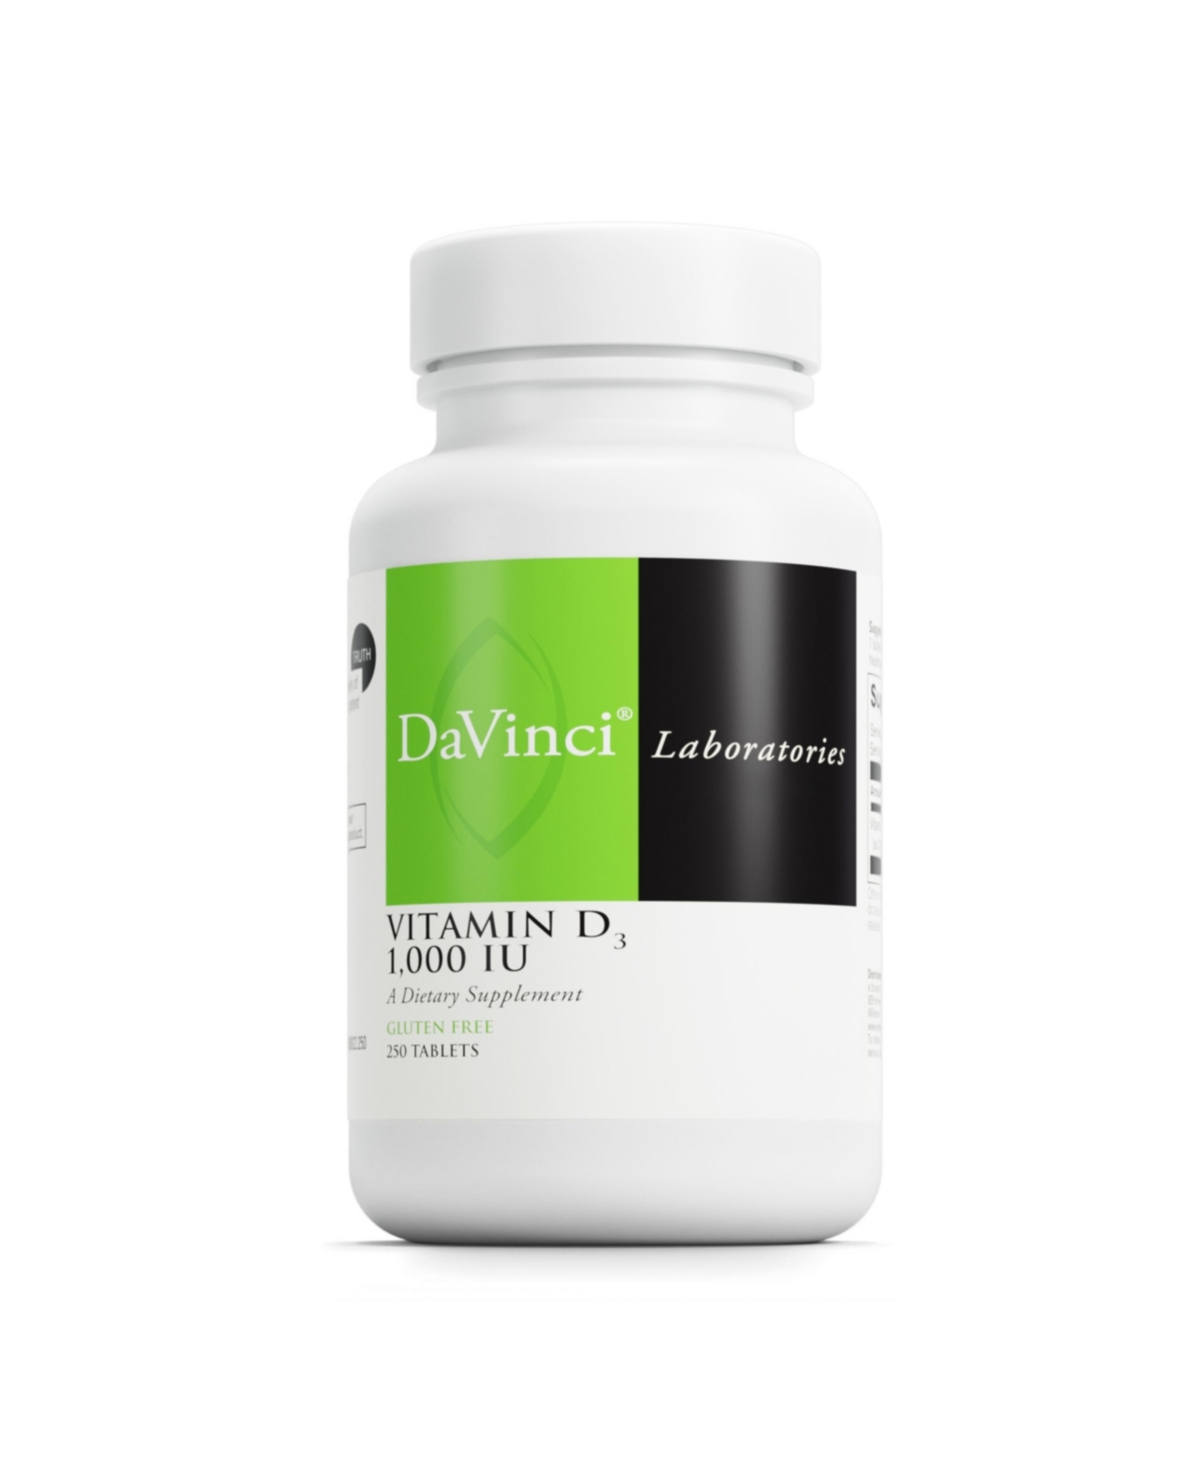 DaVinci Labs Vitamin D3 1000 Iu - Dietary Supplement to Support Healthy Teeth and Bones, Cardiovascular Function and Immune Health - With 1000 Iu per